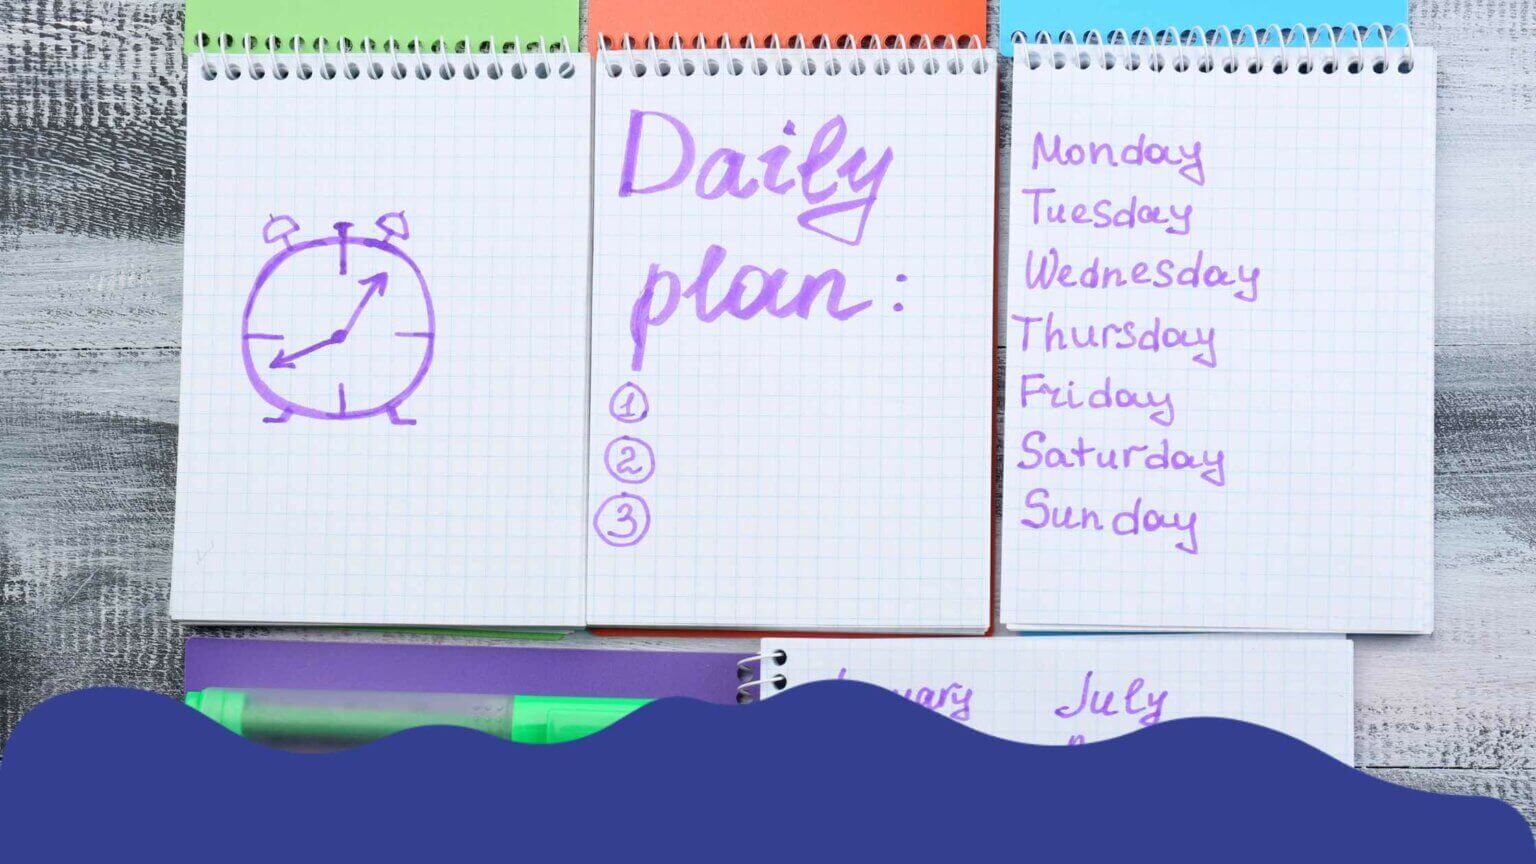 A time management daily planner with a clock for efficient scheduling.